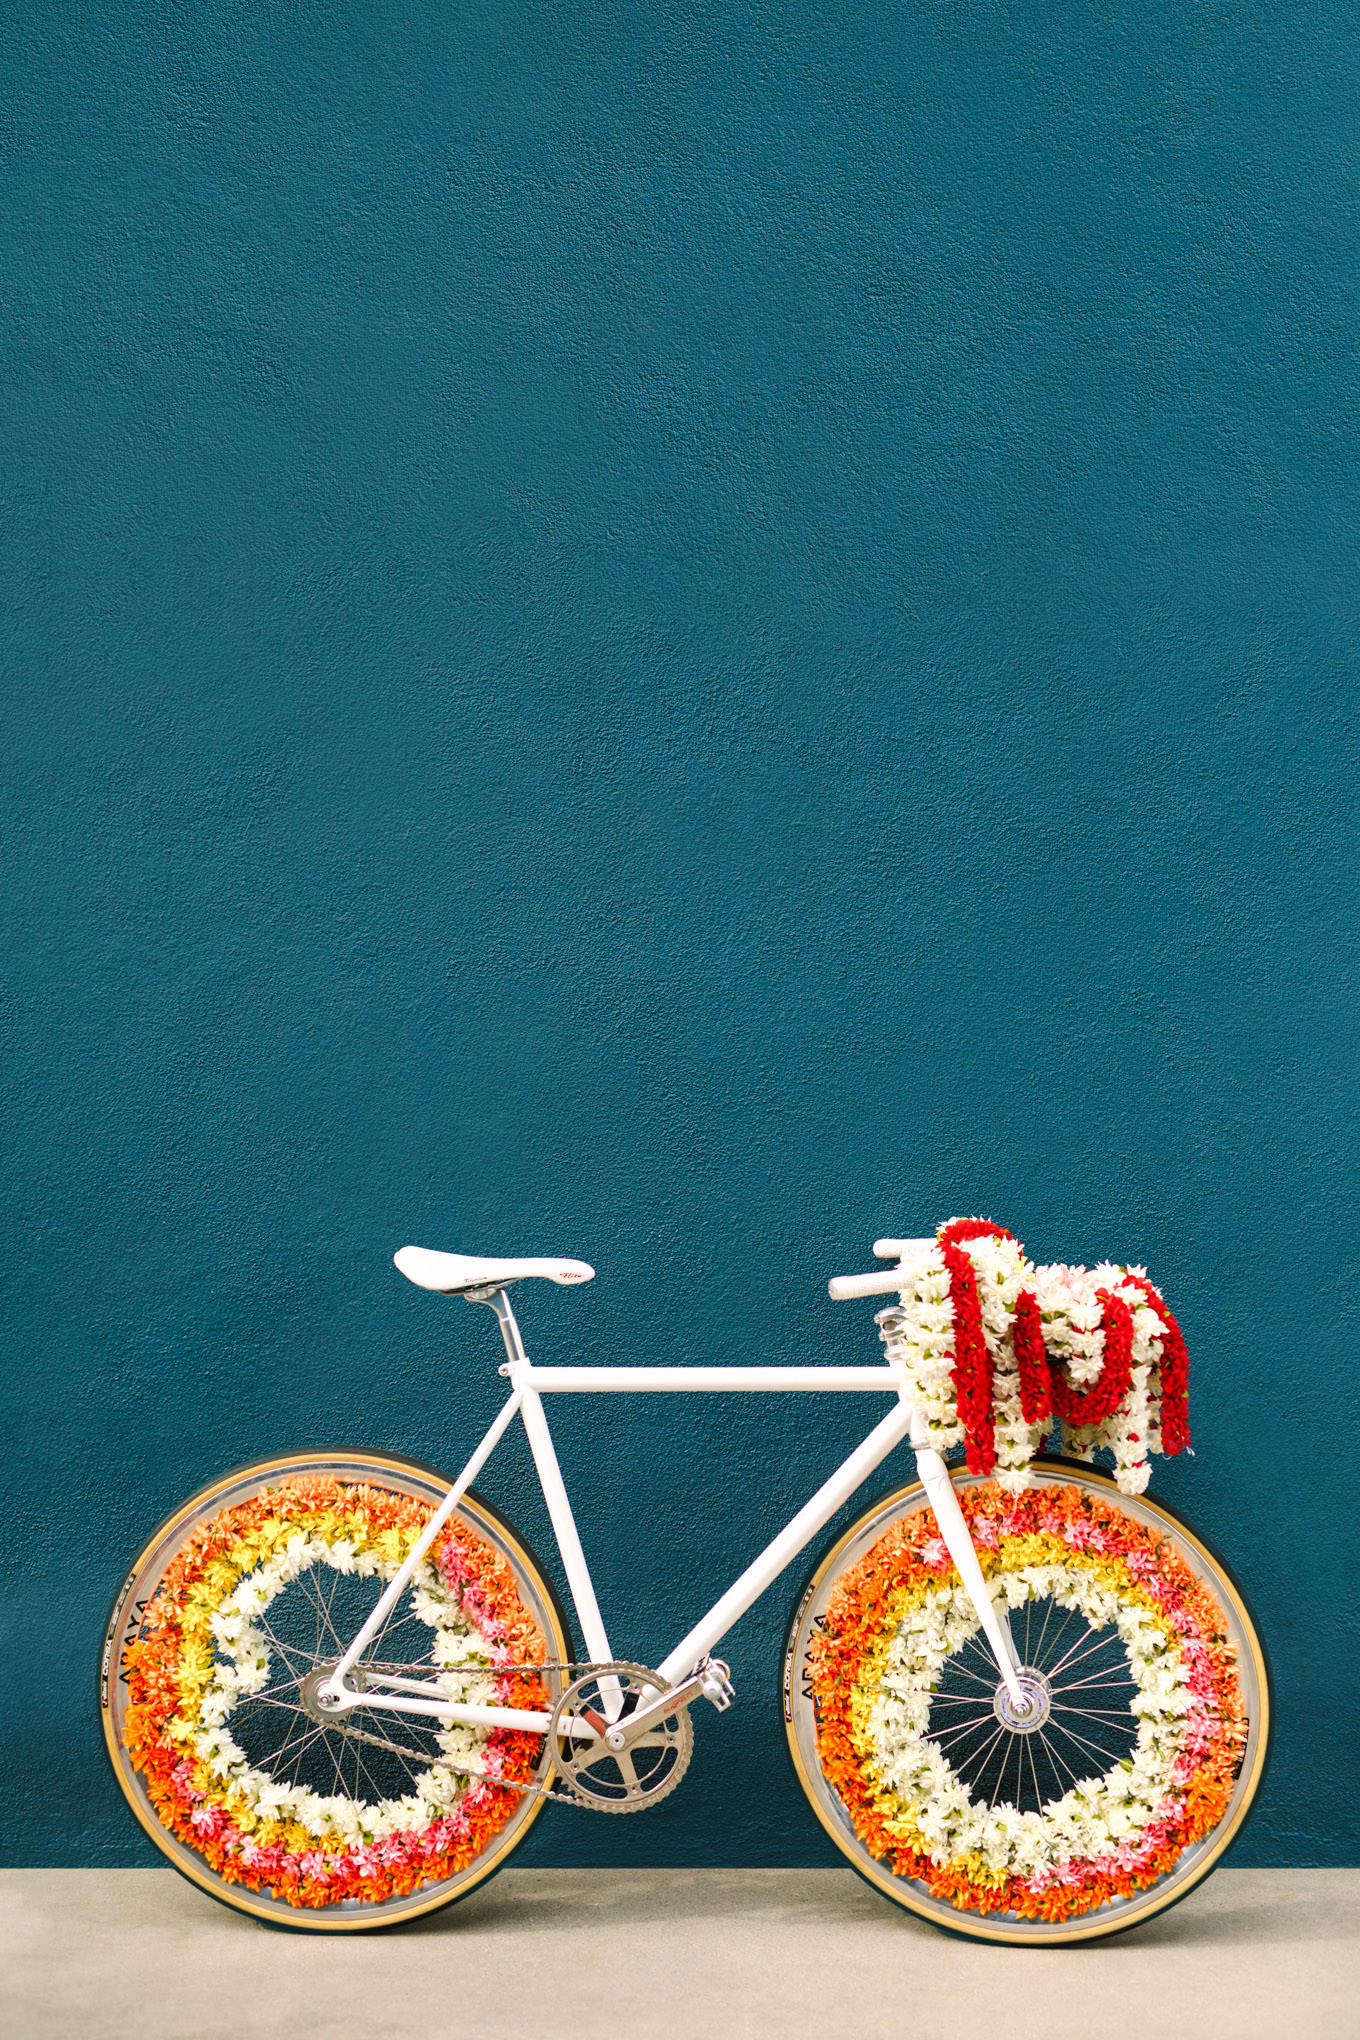 Floral Baraat bicycle on teal wall. Two Disney artists create a unique and colorful Indian Fusion wedding at The Fig House Los Angeles, featured on Green Wedding Shoes. | Colorful and elevated wedding inspiration for fun-loving couples in Southern California | #indianwedding #indianfusionwedding #thefighouse #losangeleswedding   Source: Mary Costa Photography | Los Angeles